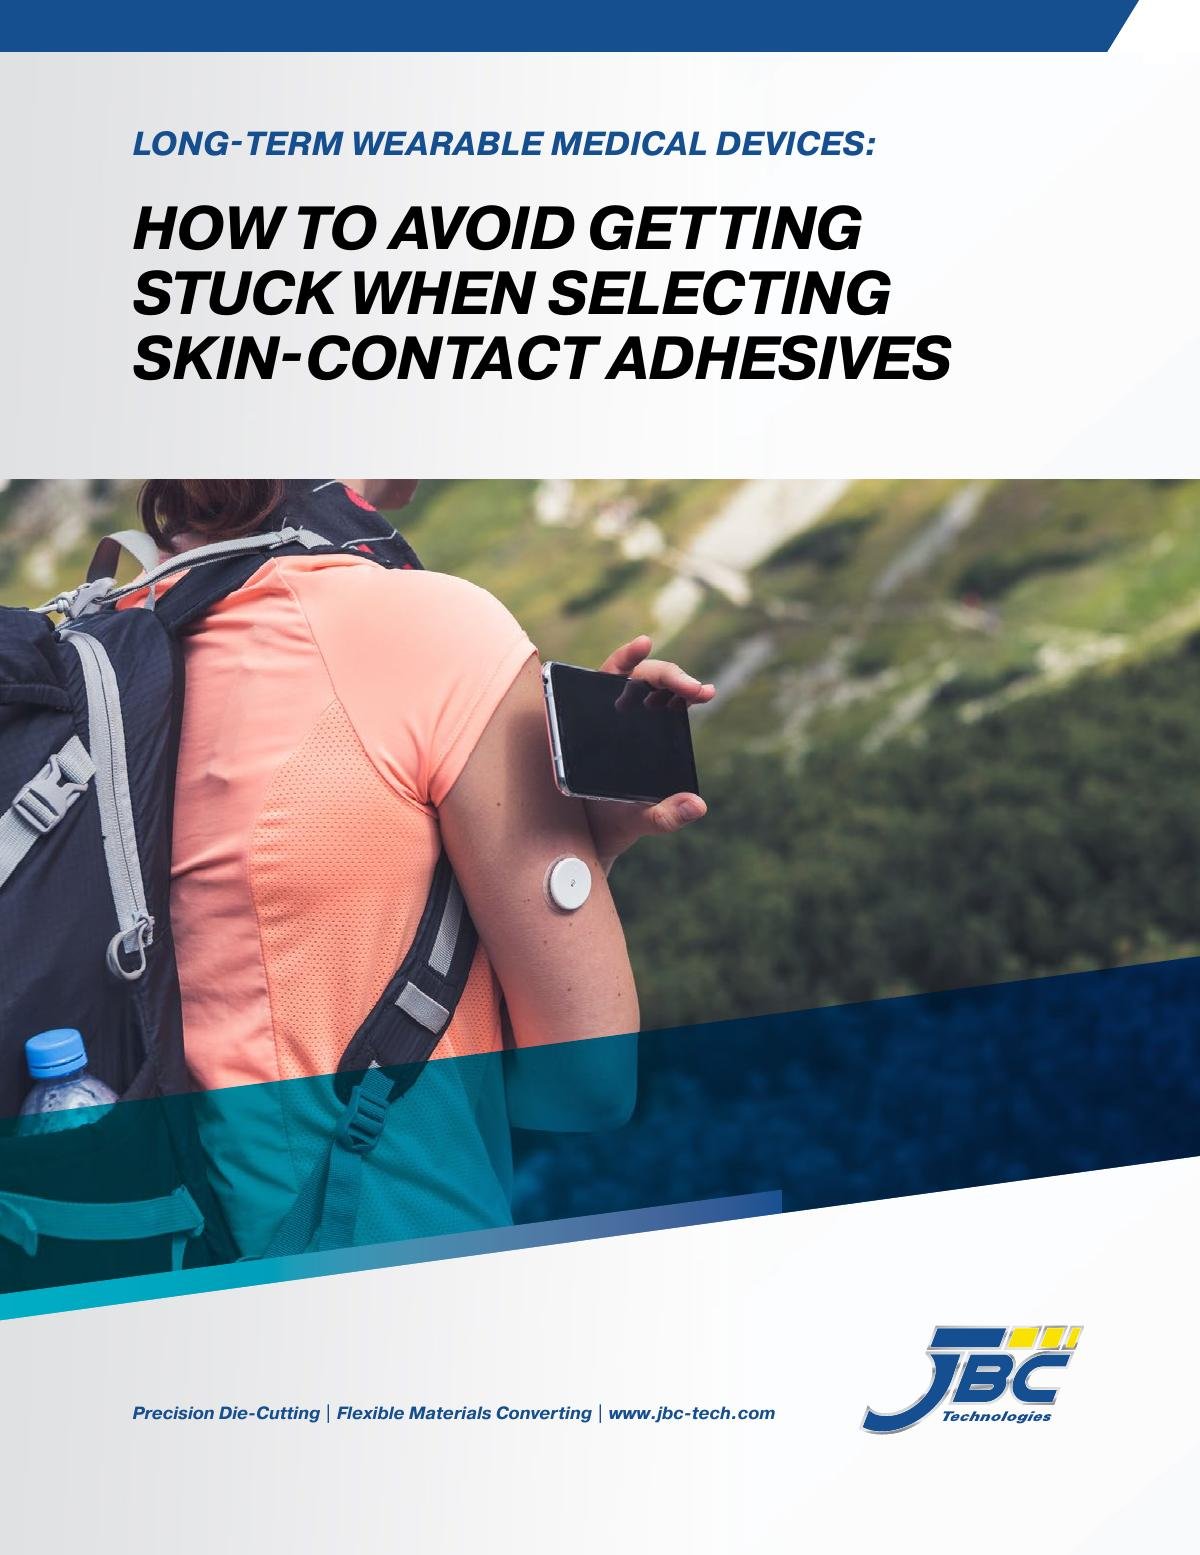 How to Avoid Getting Stuck When Selecting Skin-Contact Adhesives